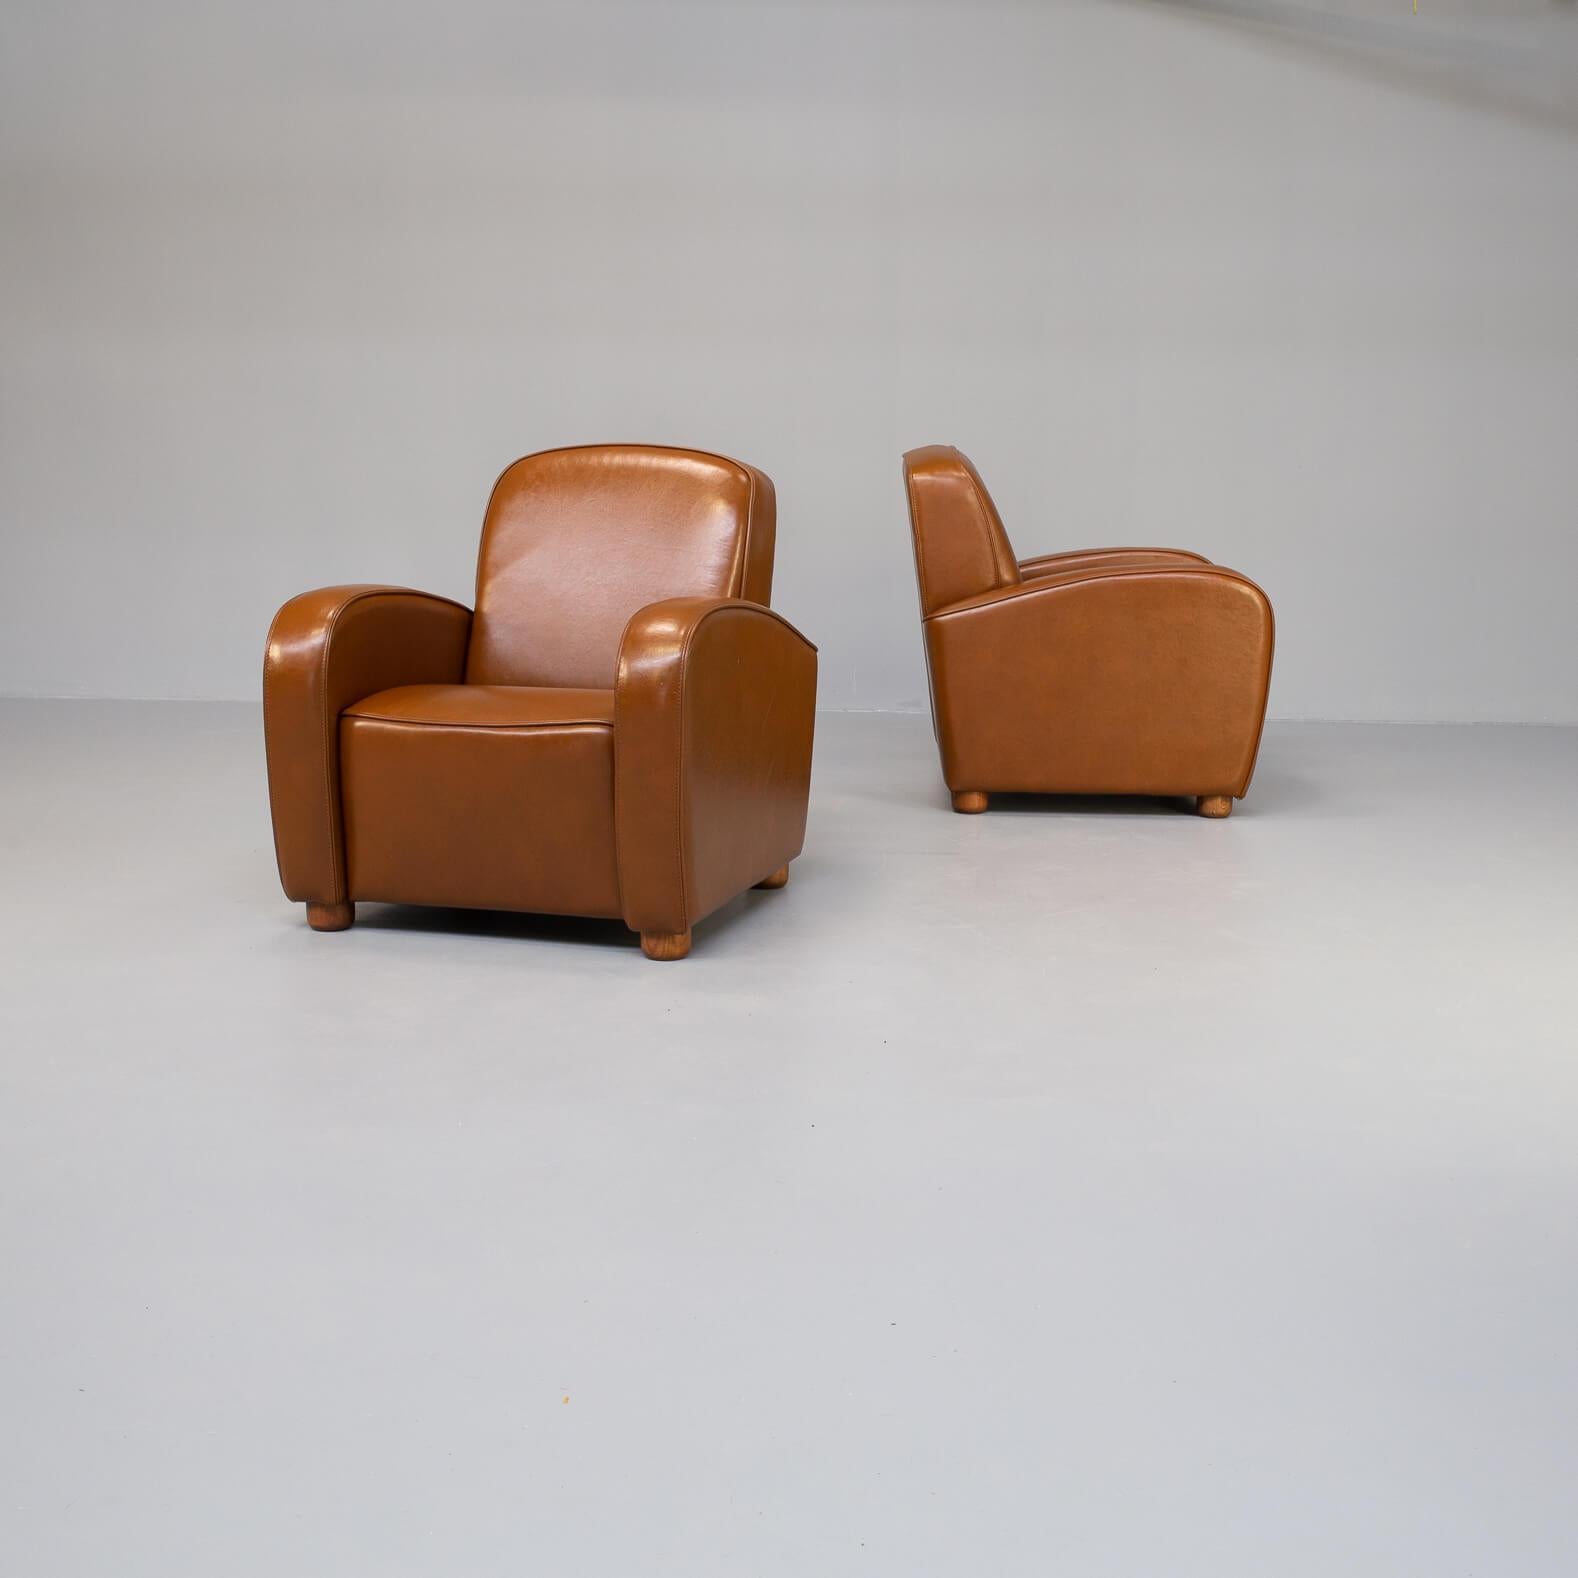 One set of two beautiful lounge fauteuils in cognac leather by the Italian IDP Industria divani e Poltrone. The building quality of these chairs are very high end, good to be seen on the seating cushion with the almost smiling way the chairs looks